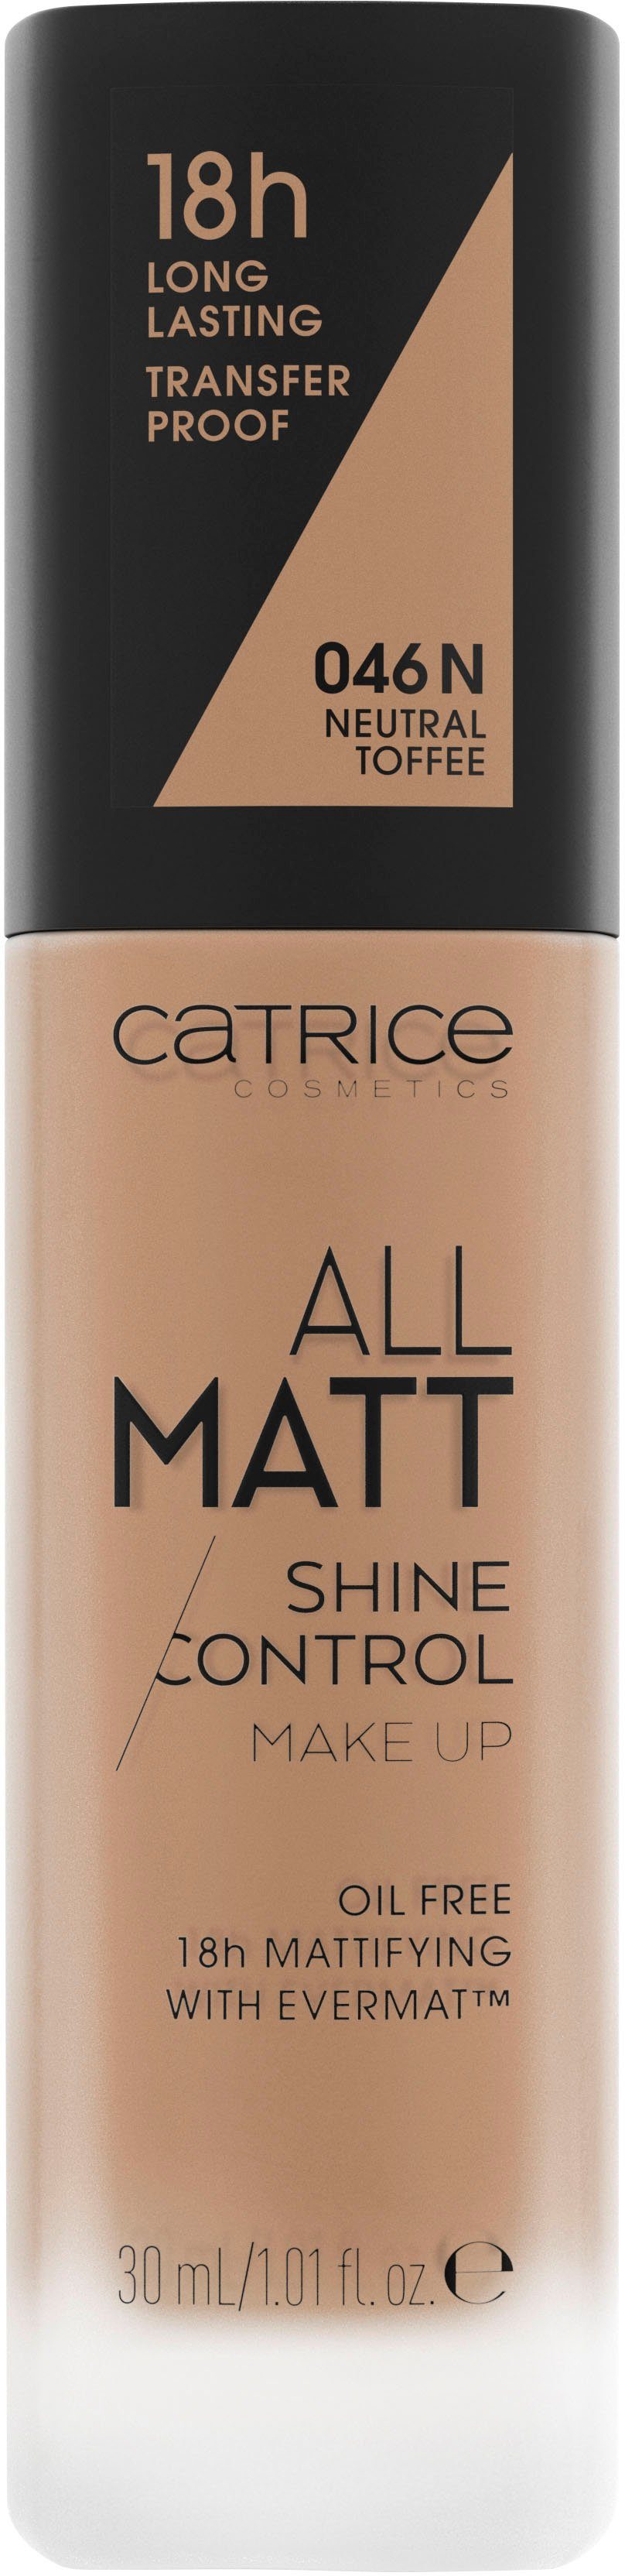 Catrice Foundation All Neutral Up Matt Control Make Toffee Shine